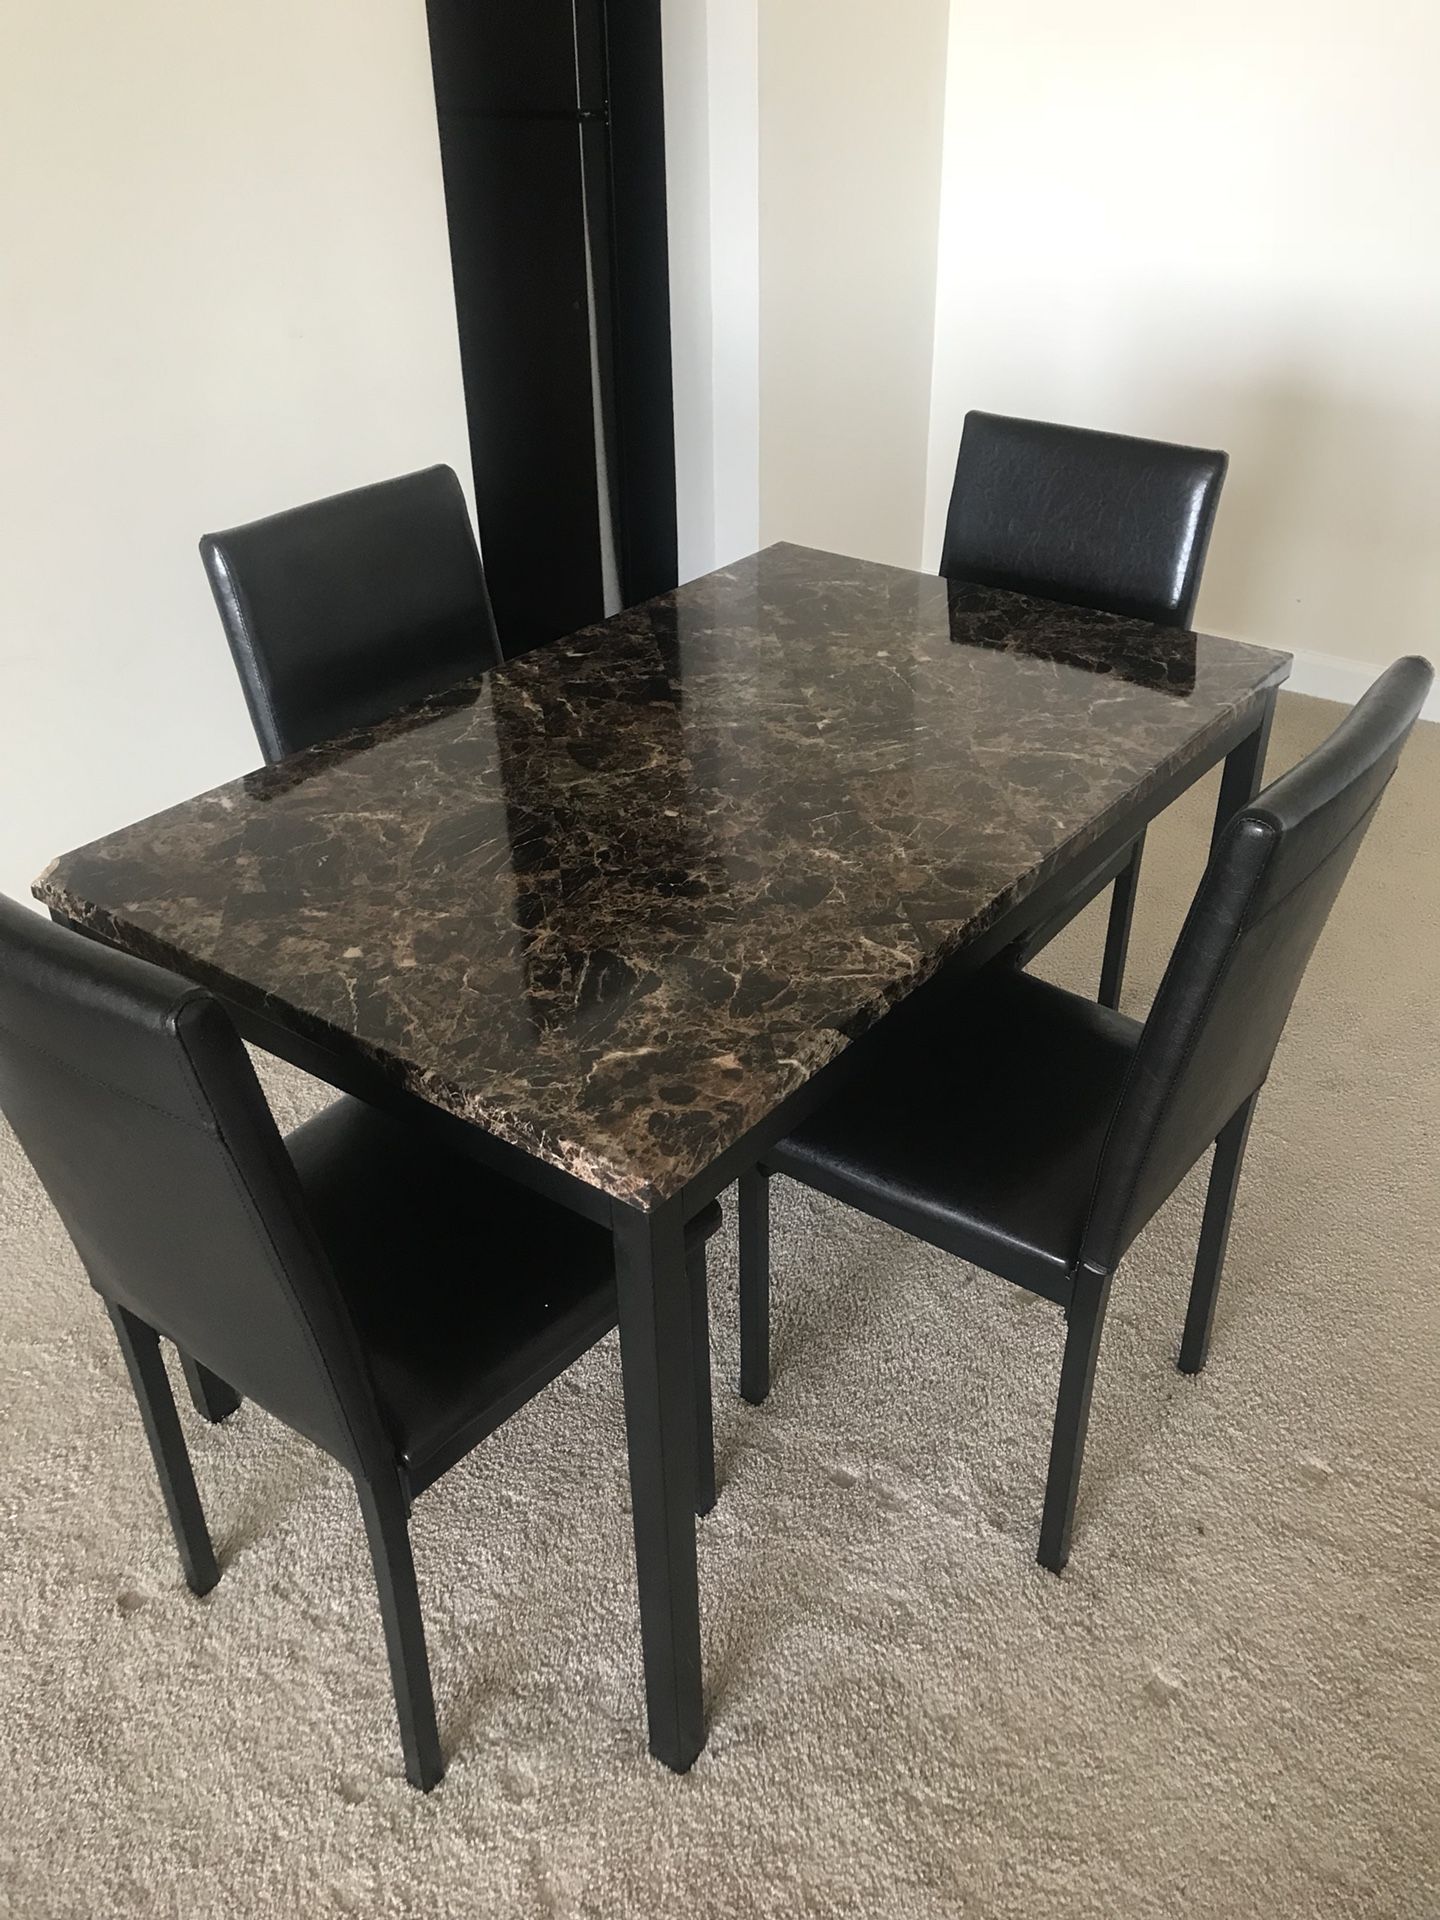 Faux Marble Table (chairs not included)